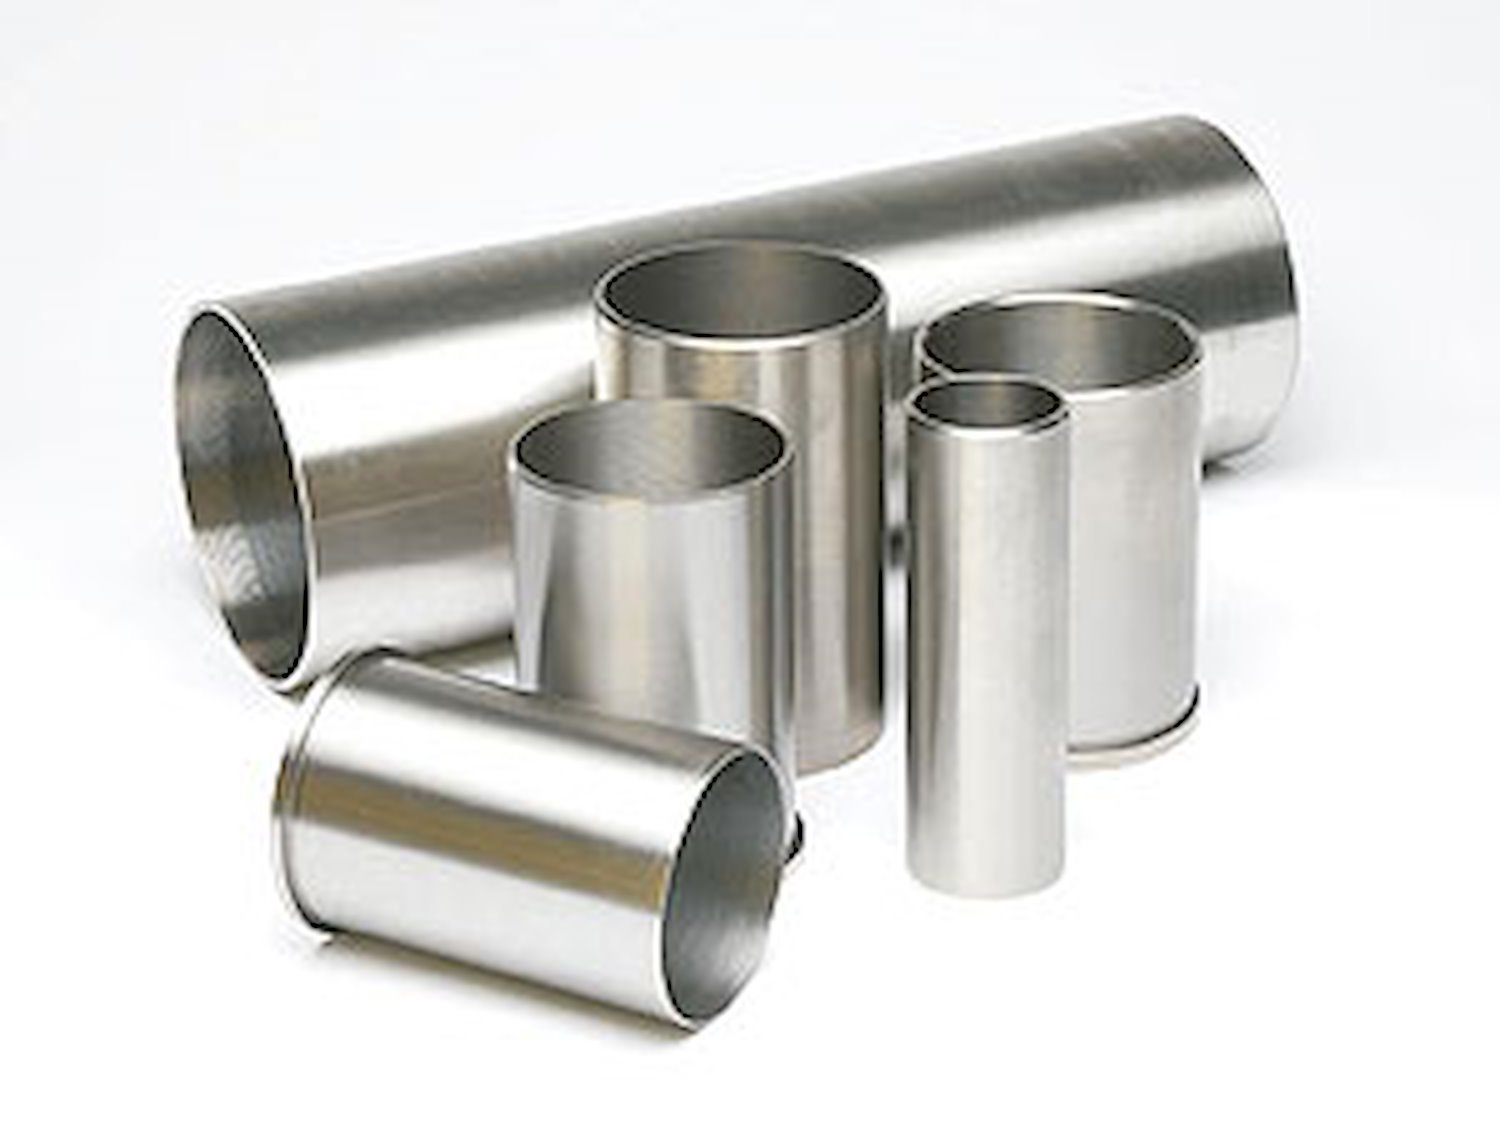 Cylinder Sleeve Bore: 2.5675" Length: 6-1/2" Wall Thickness: 3/32"